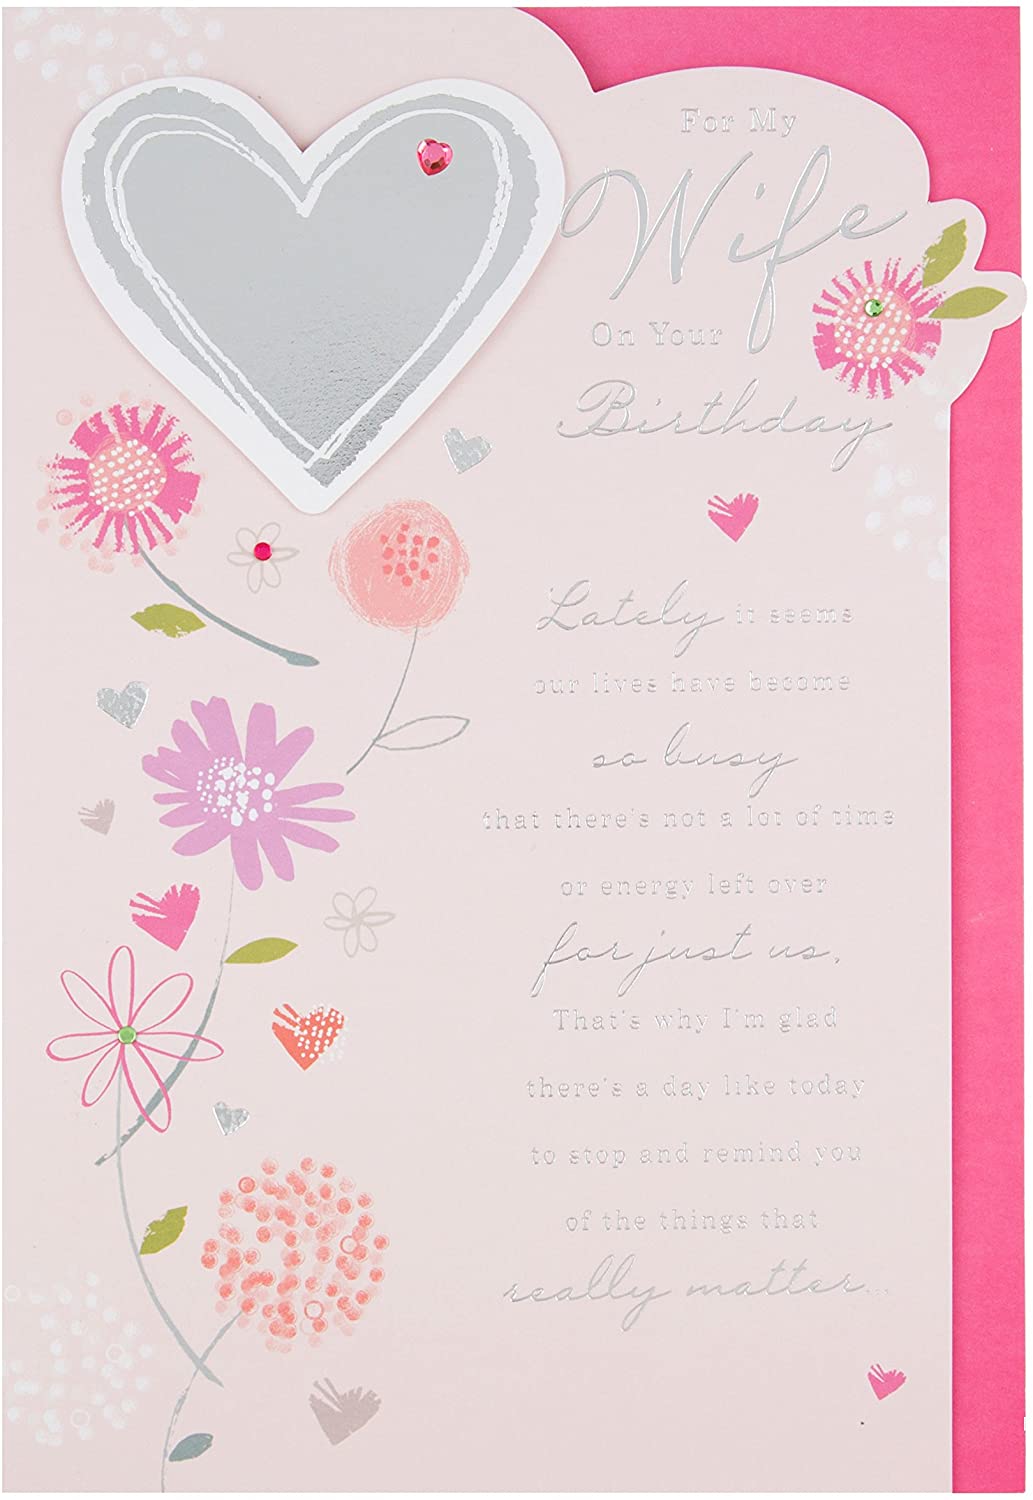 Wife Birthday Card - Love Blossoms: A Heartfelt Reminder of Our Precious Connection